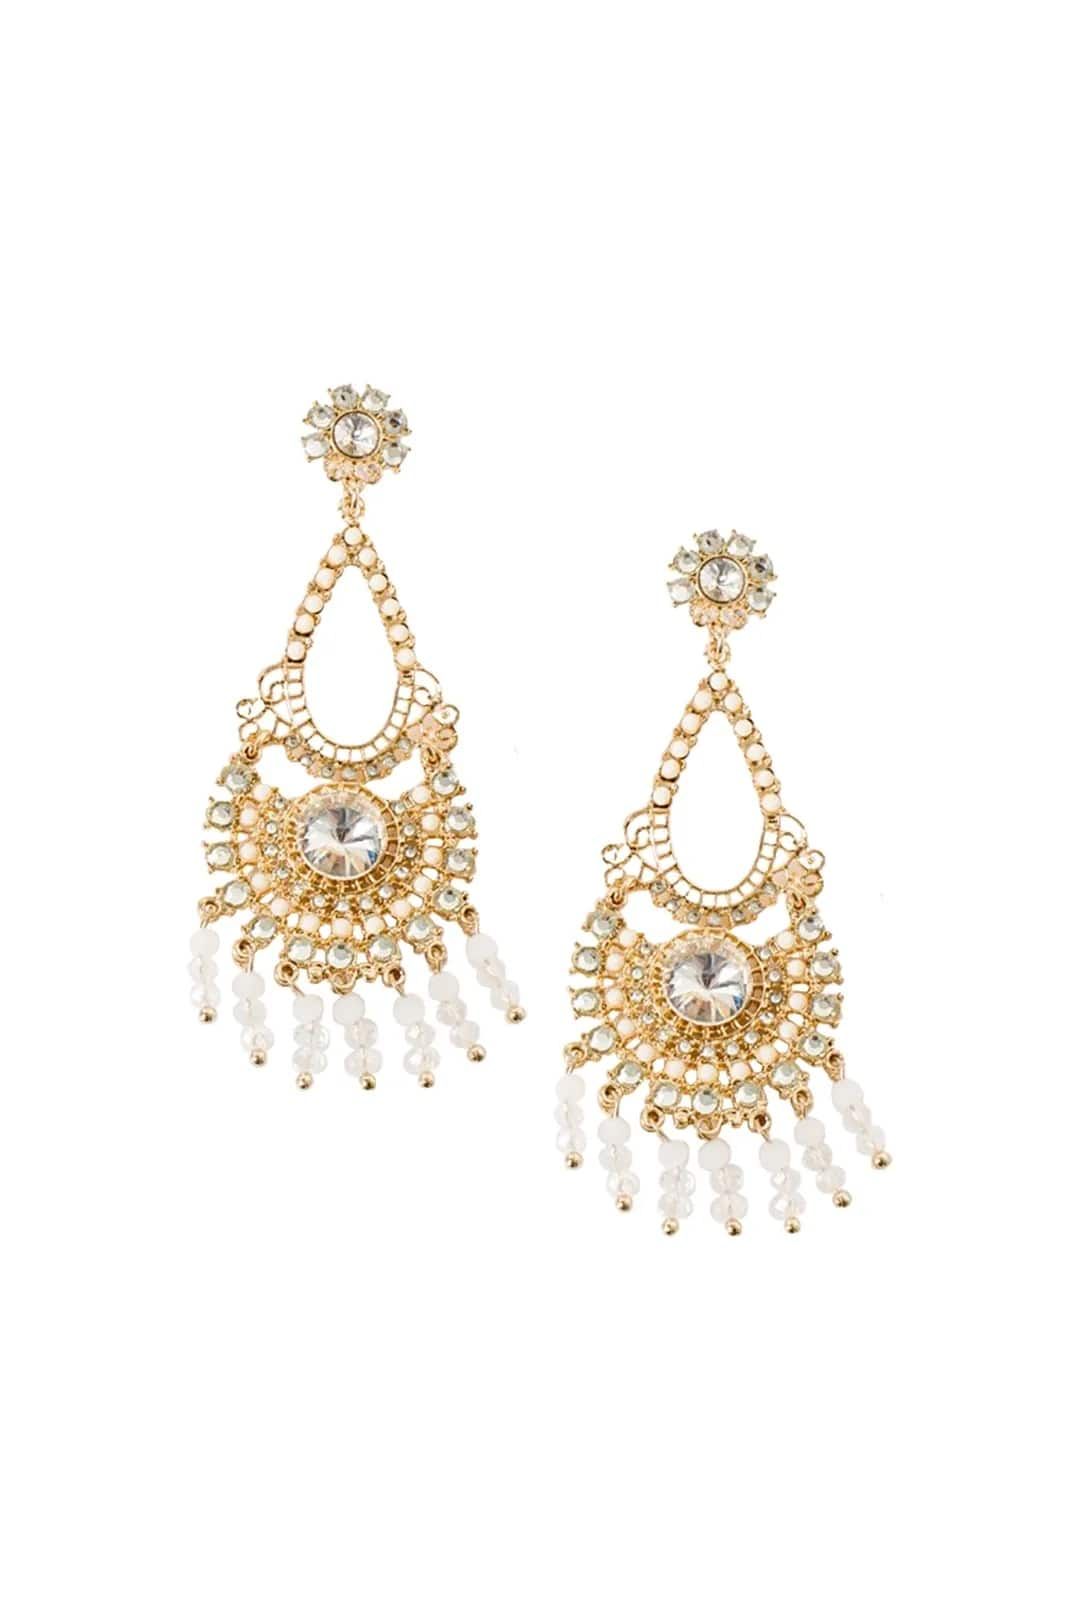 Beaded Droplets Diamante Earring by Adorne, available for purchase